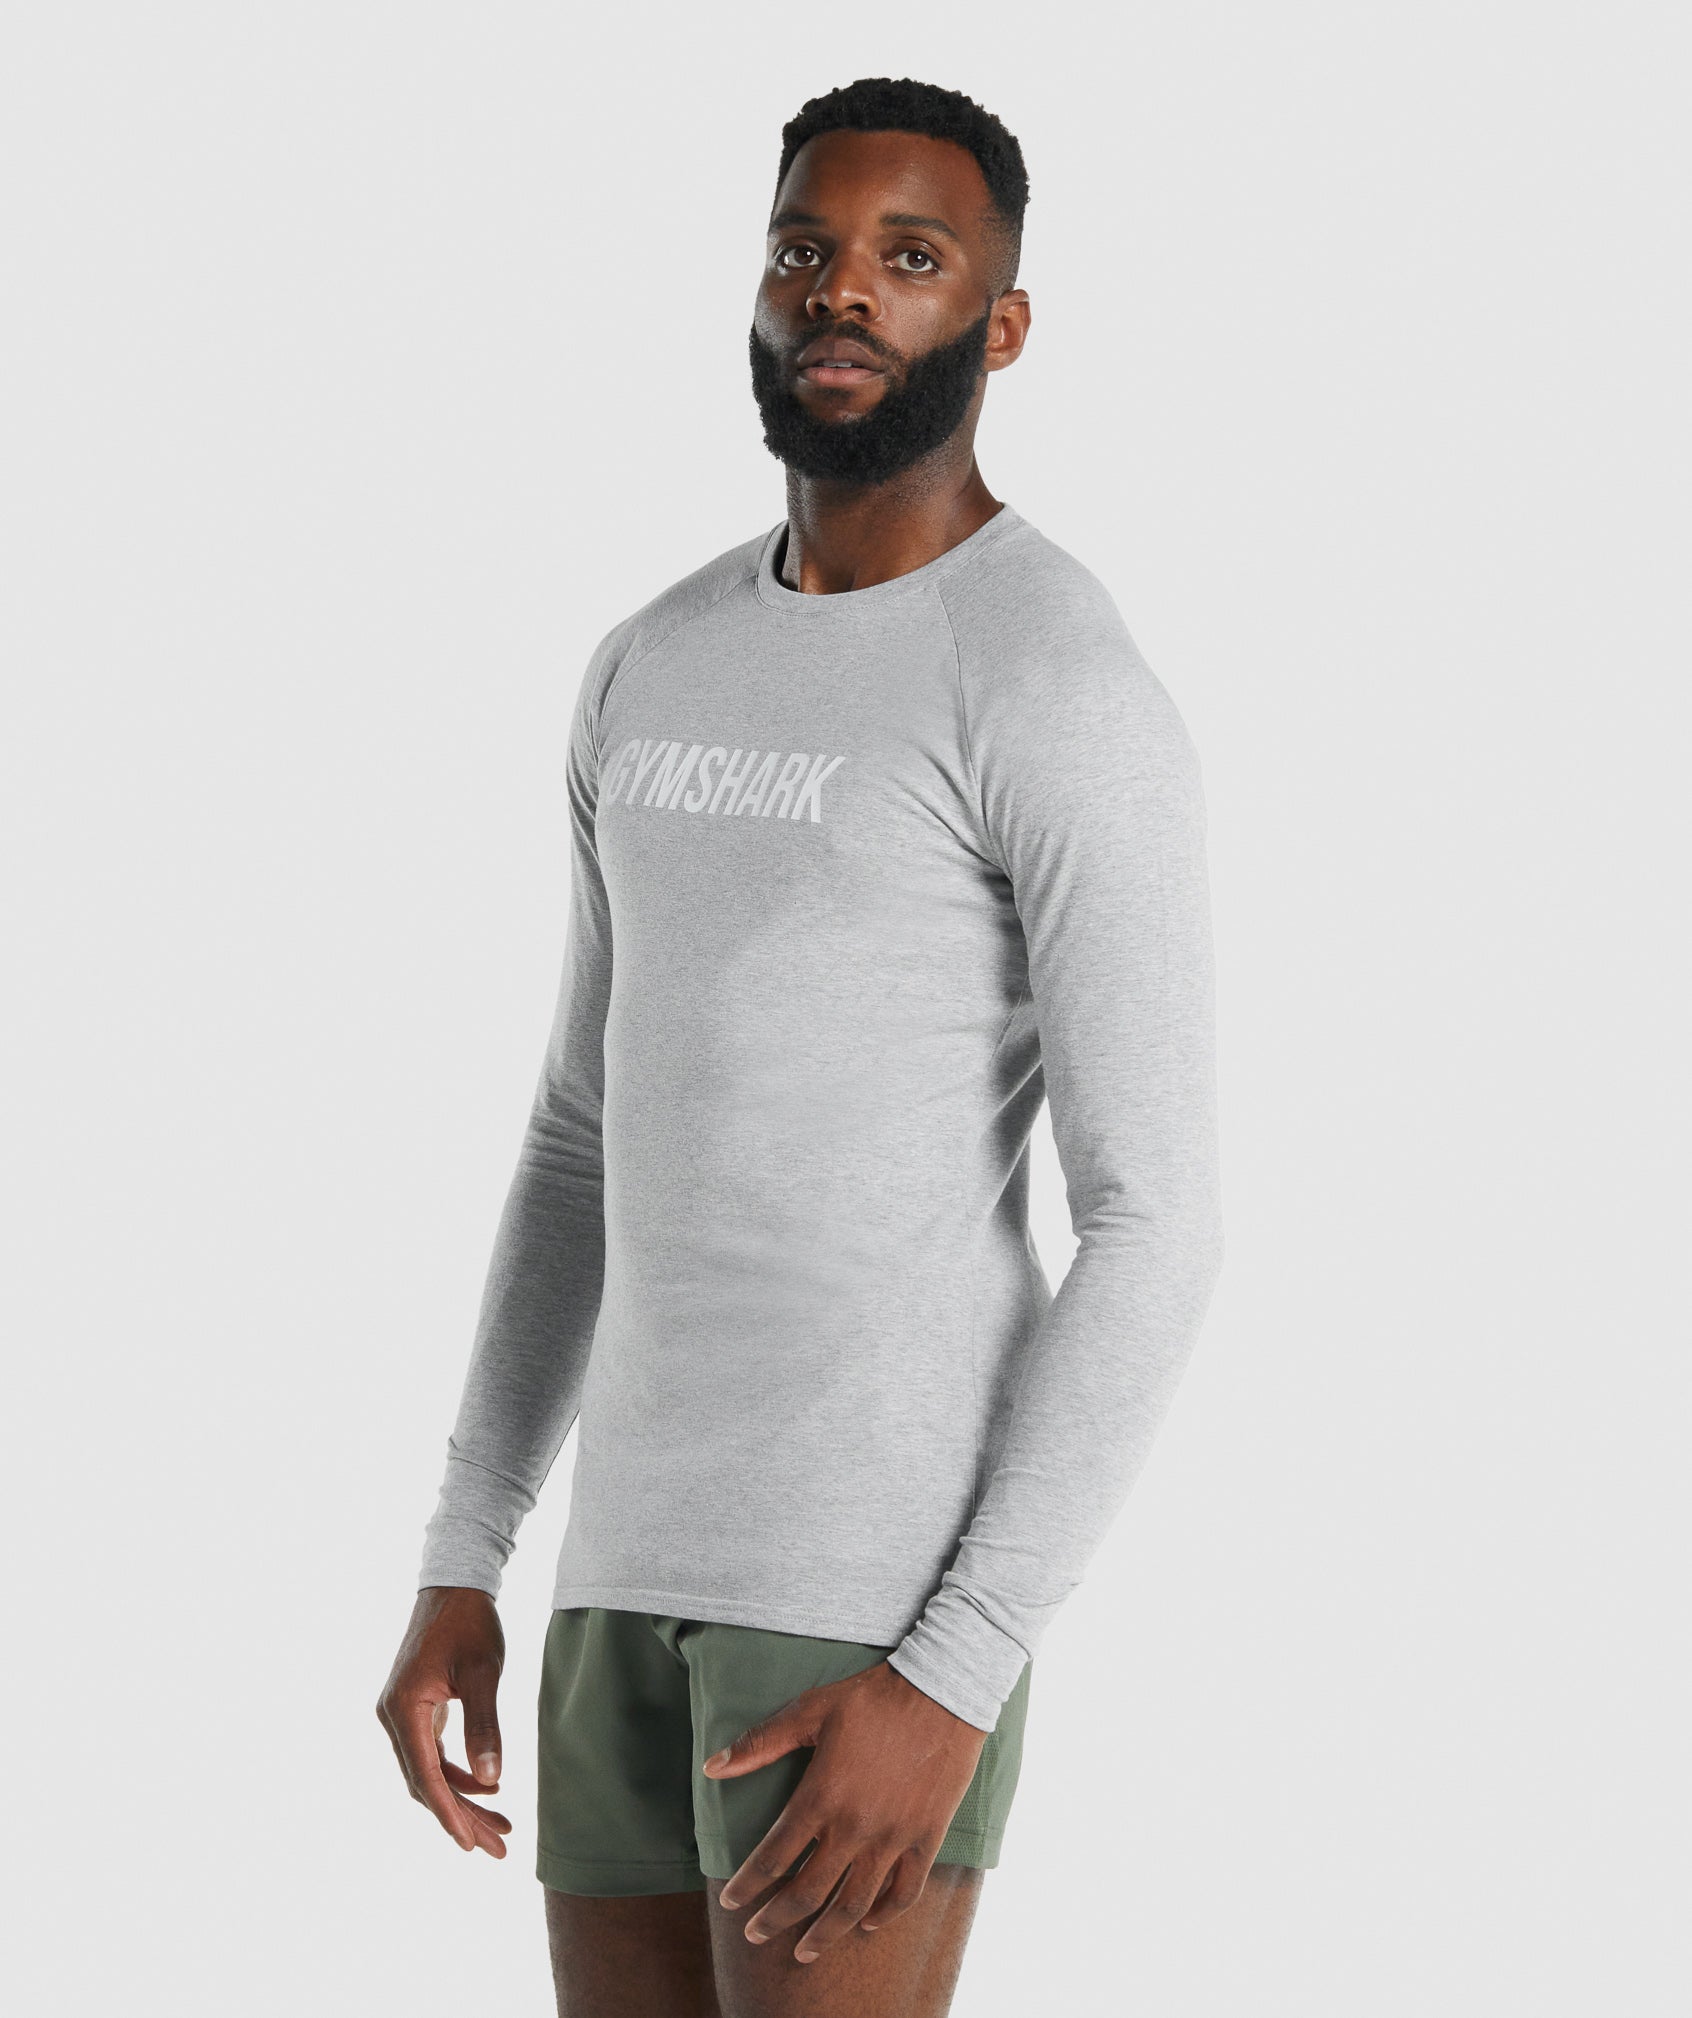 Apollo Long Sleeve T-Shirt in Light Grey Marl - view 4